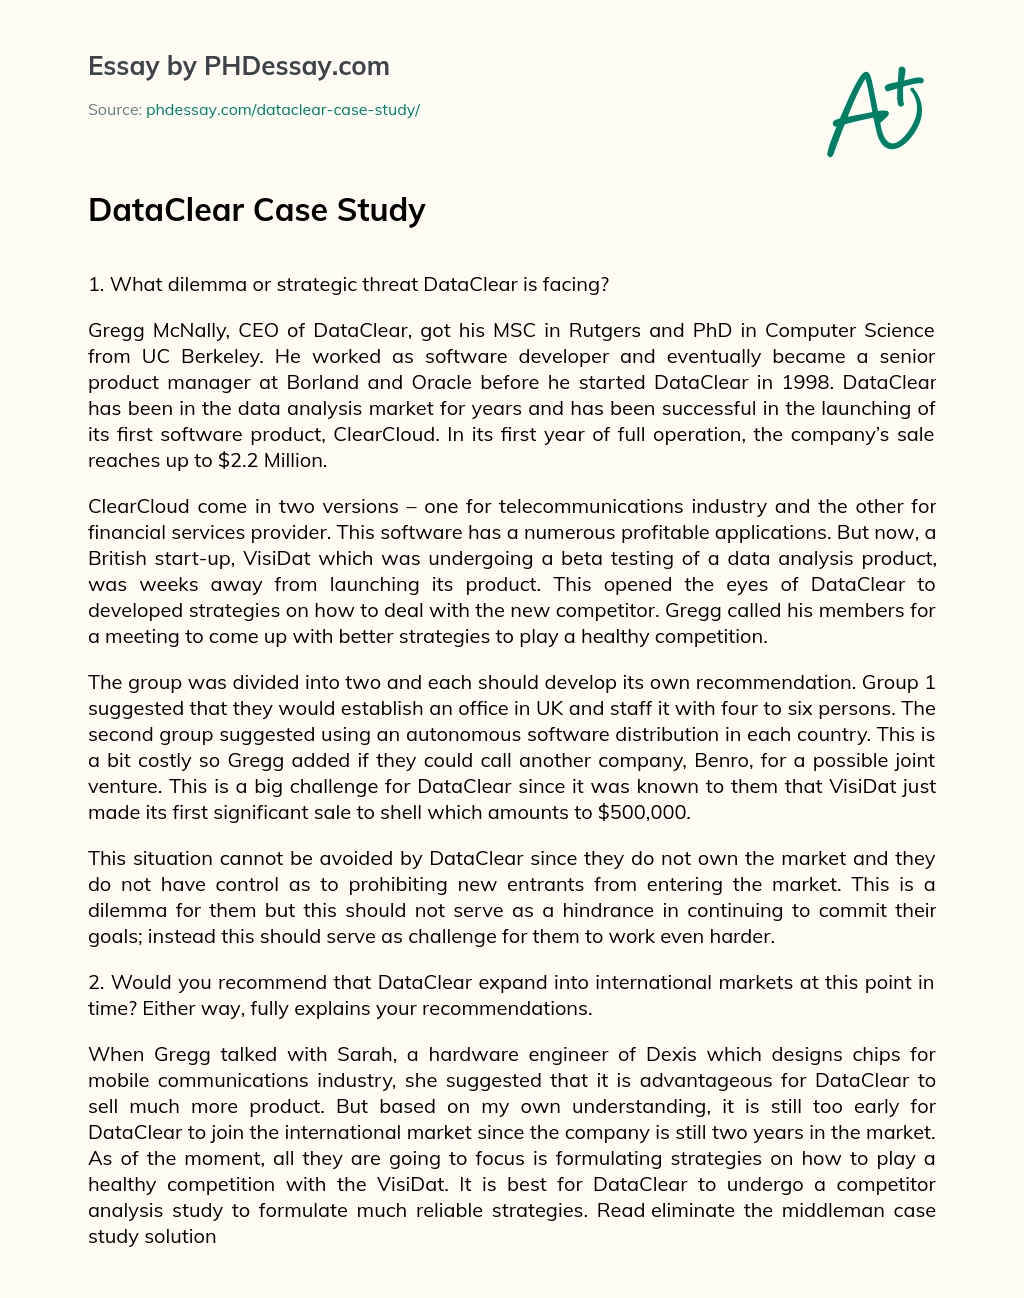 DataClear Case Study essay